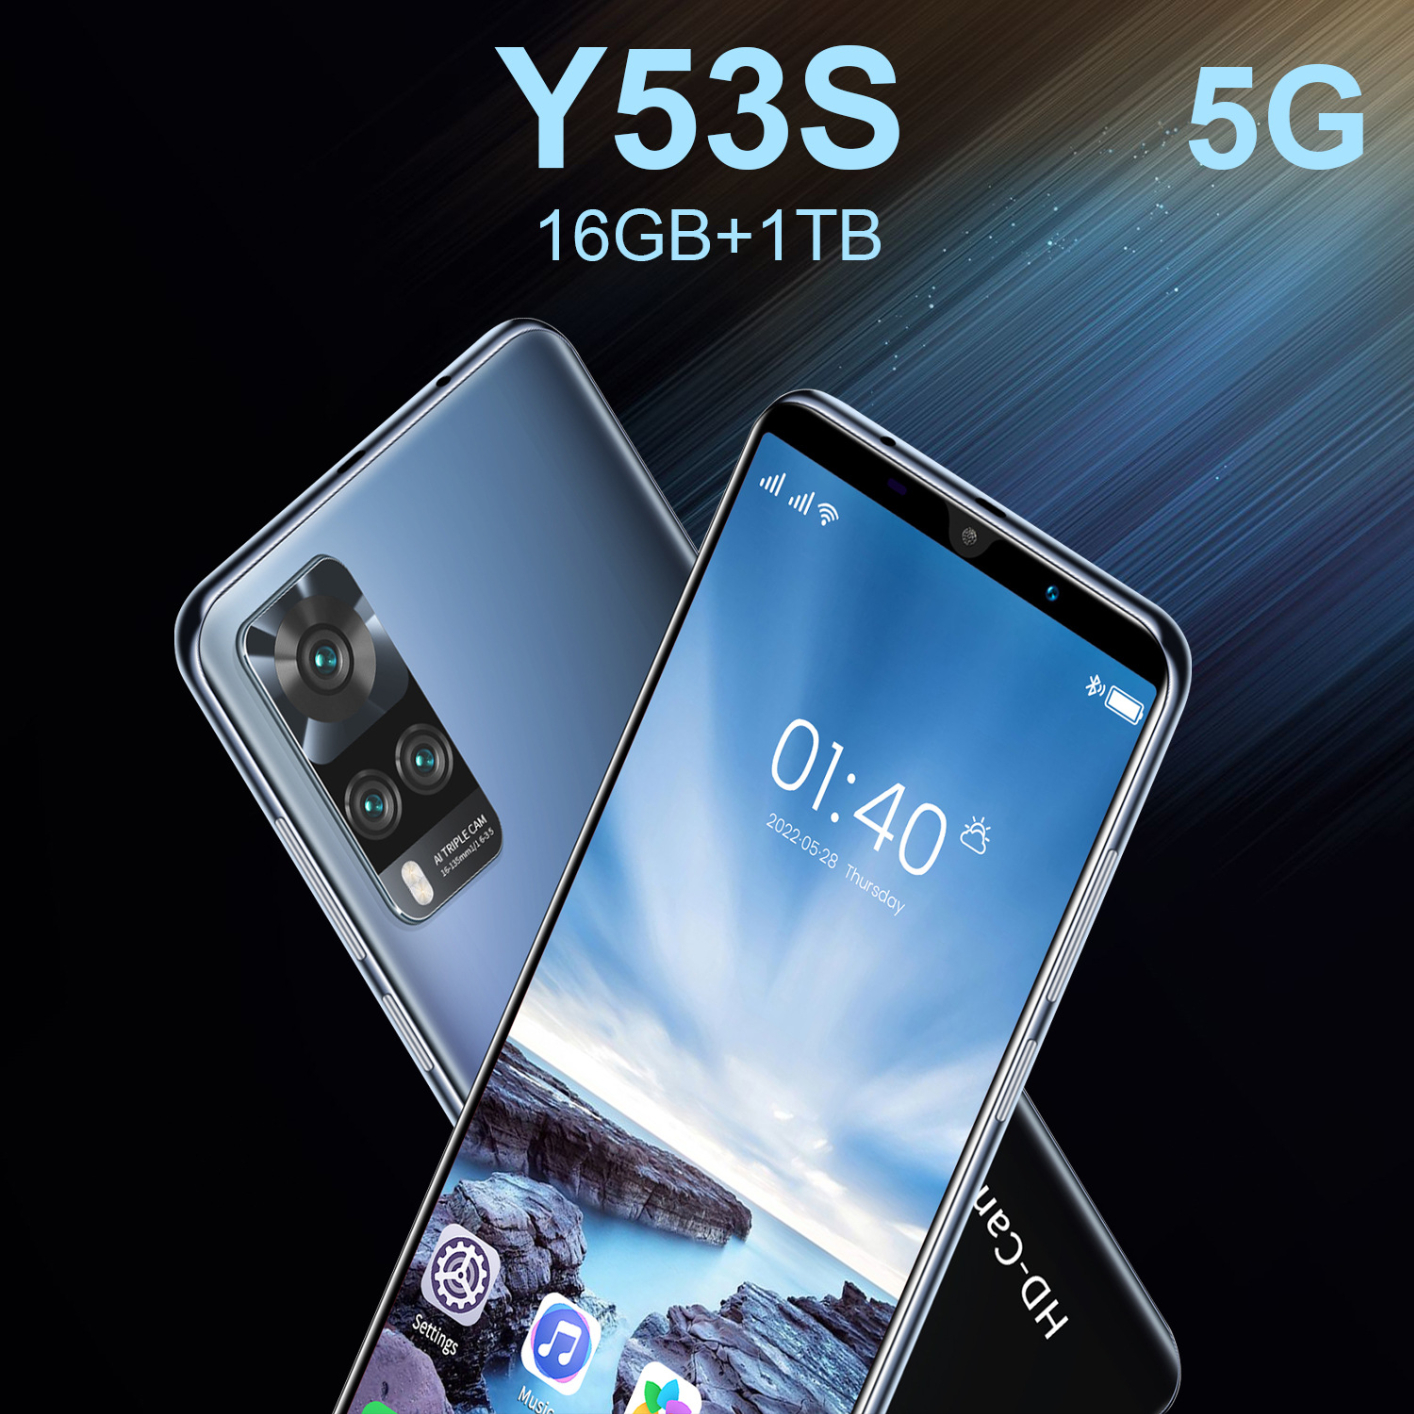 New Global Version Smartphone Y53S Cellphones Full Screen 5.2 inch 16GB+1TB 4000mAh Battery Mobile Phone